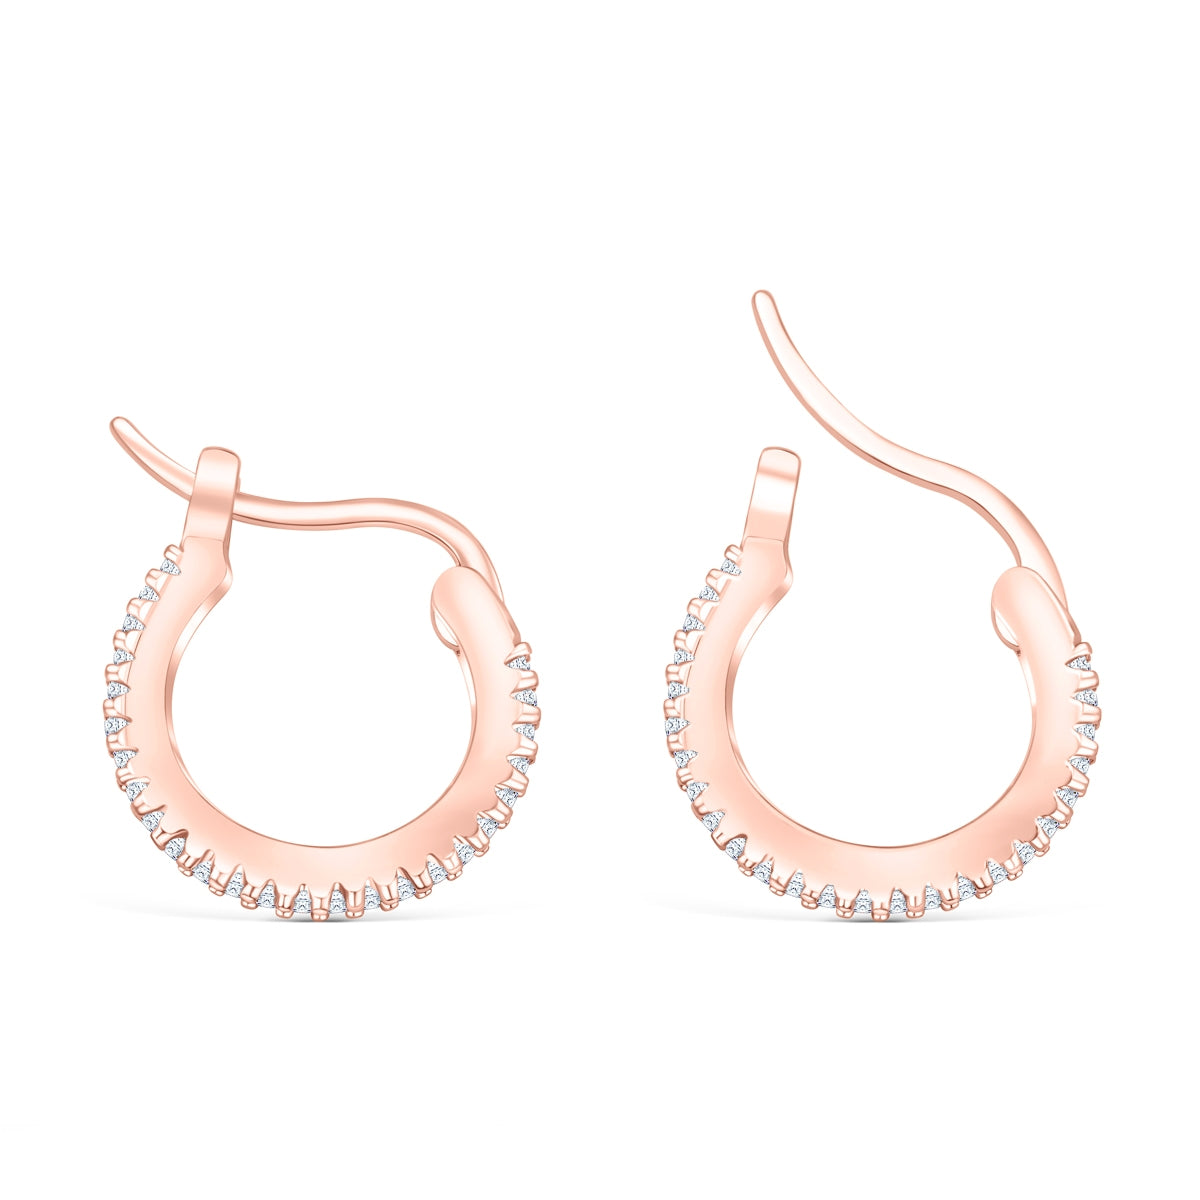 Huggie rose gold earrings with stones